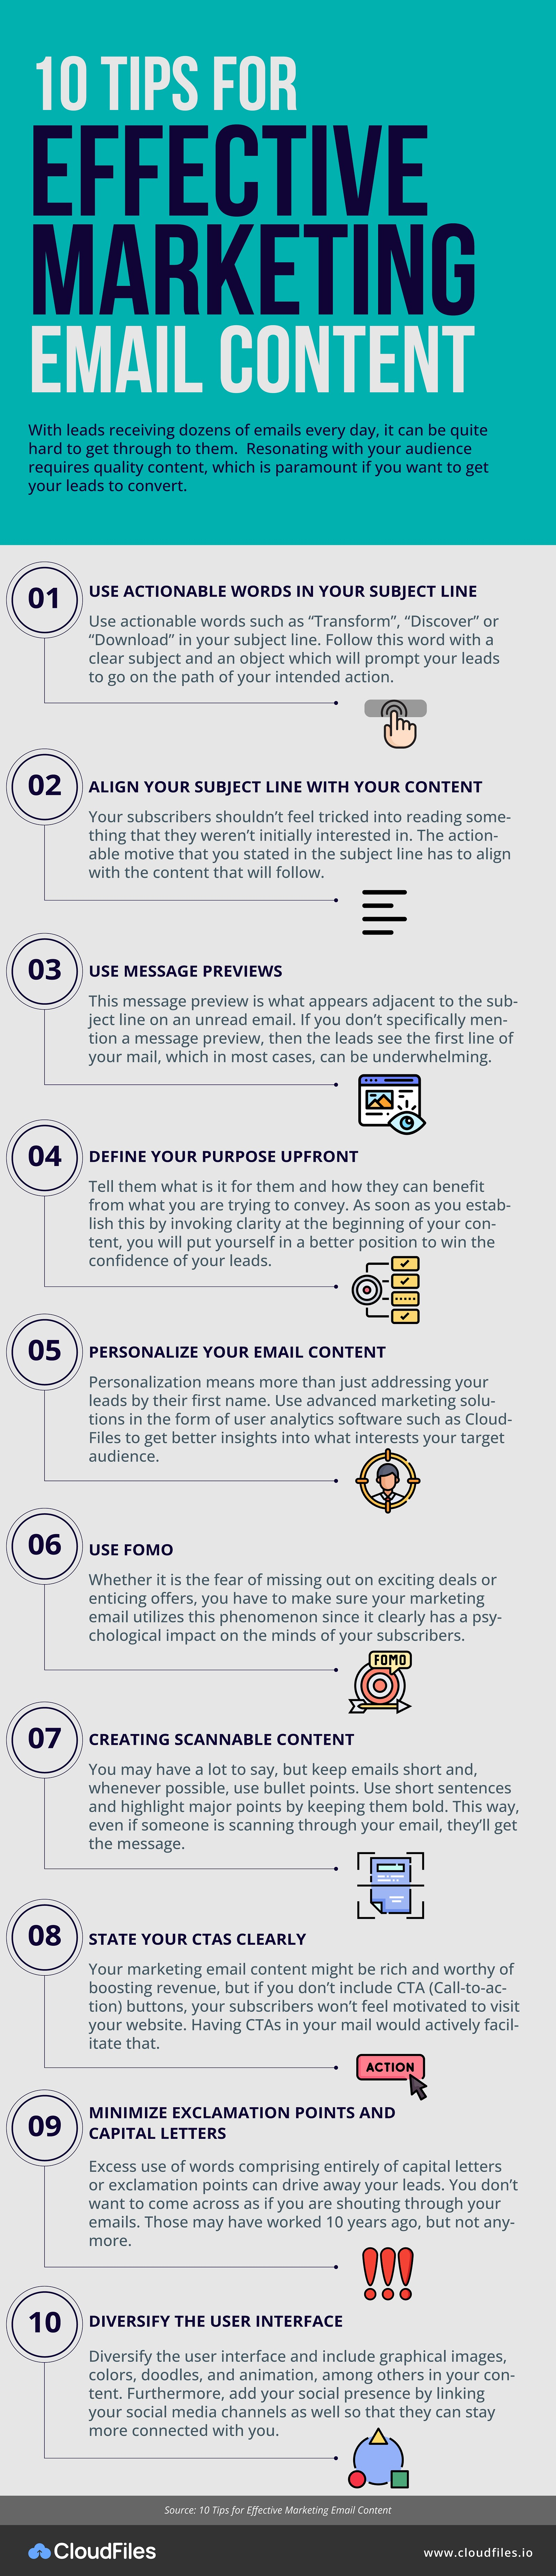 10 Tips for Effective Marketing Email Content